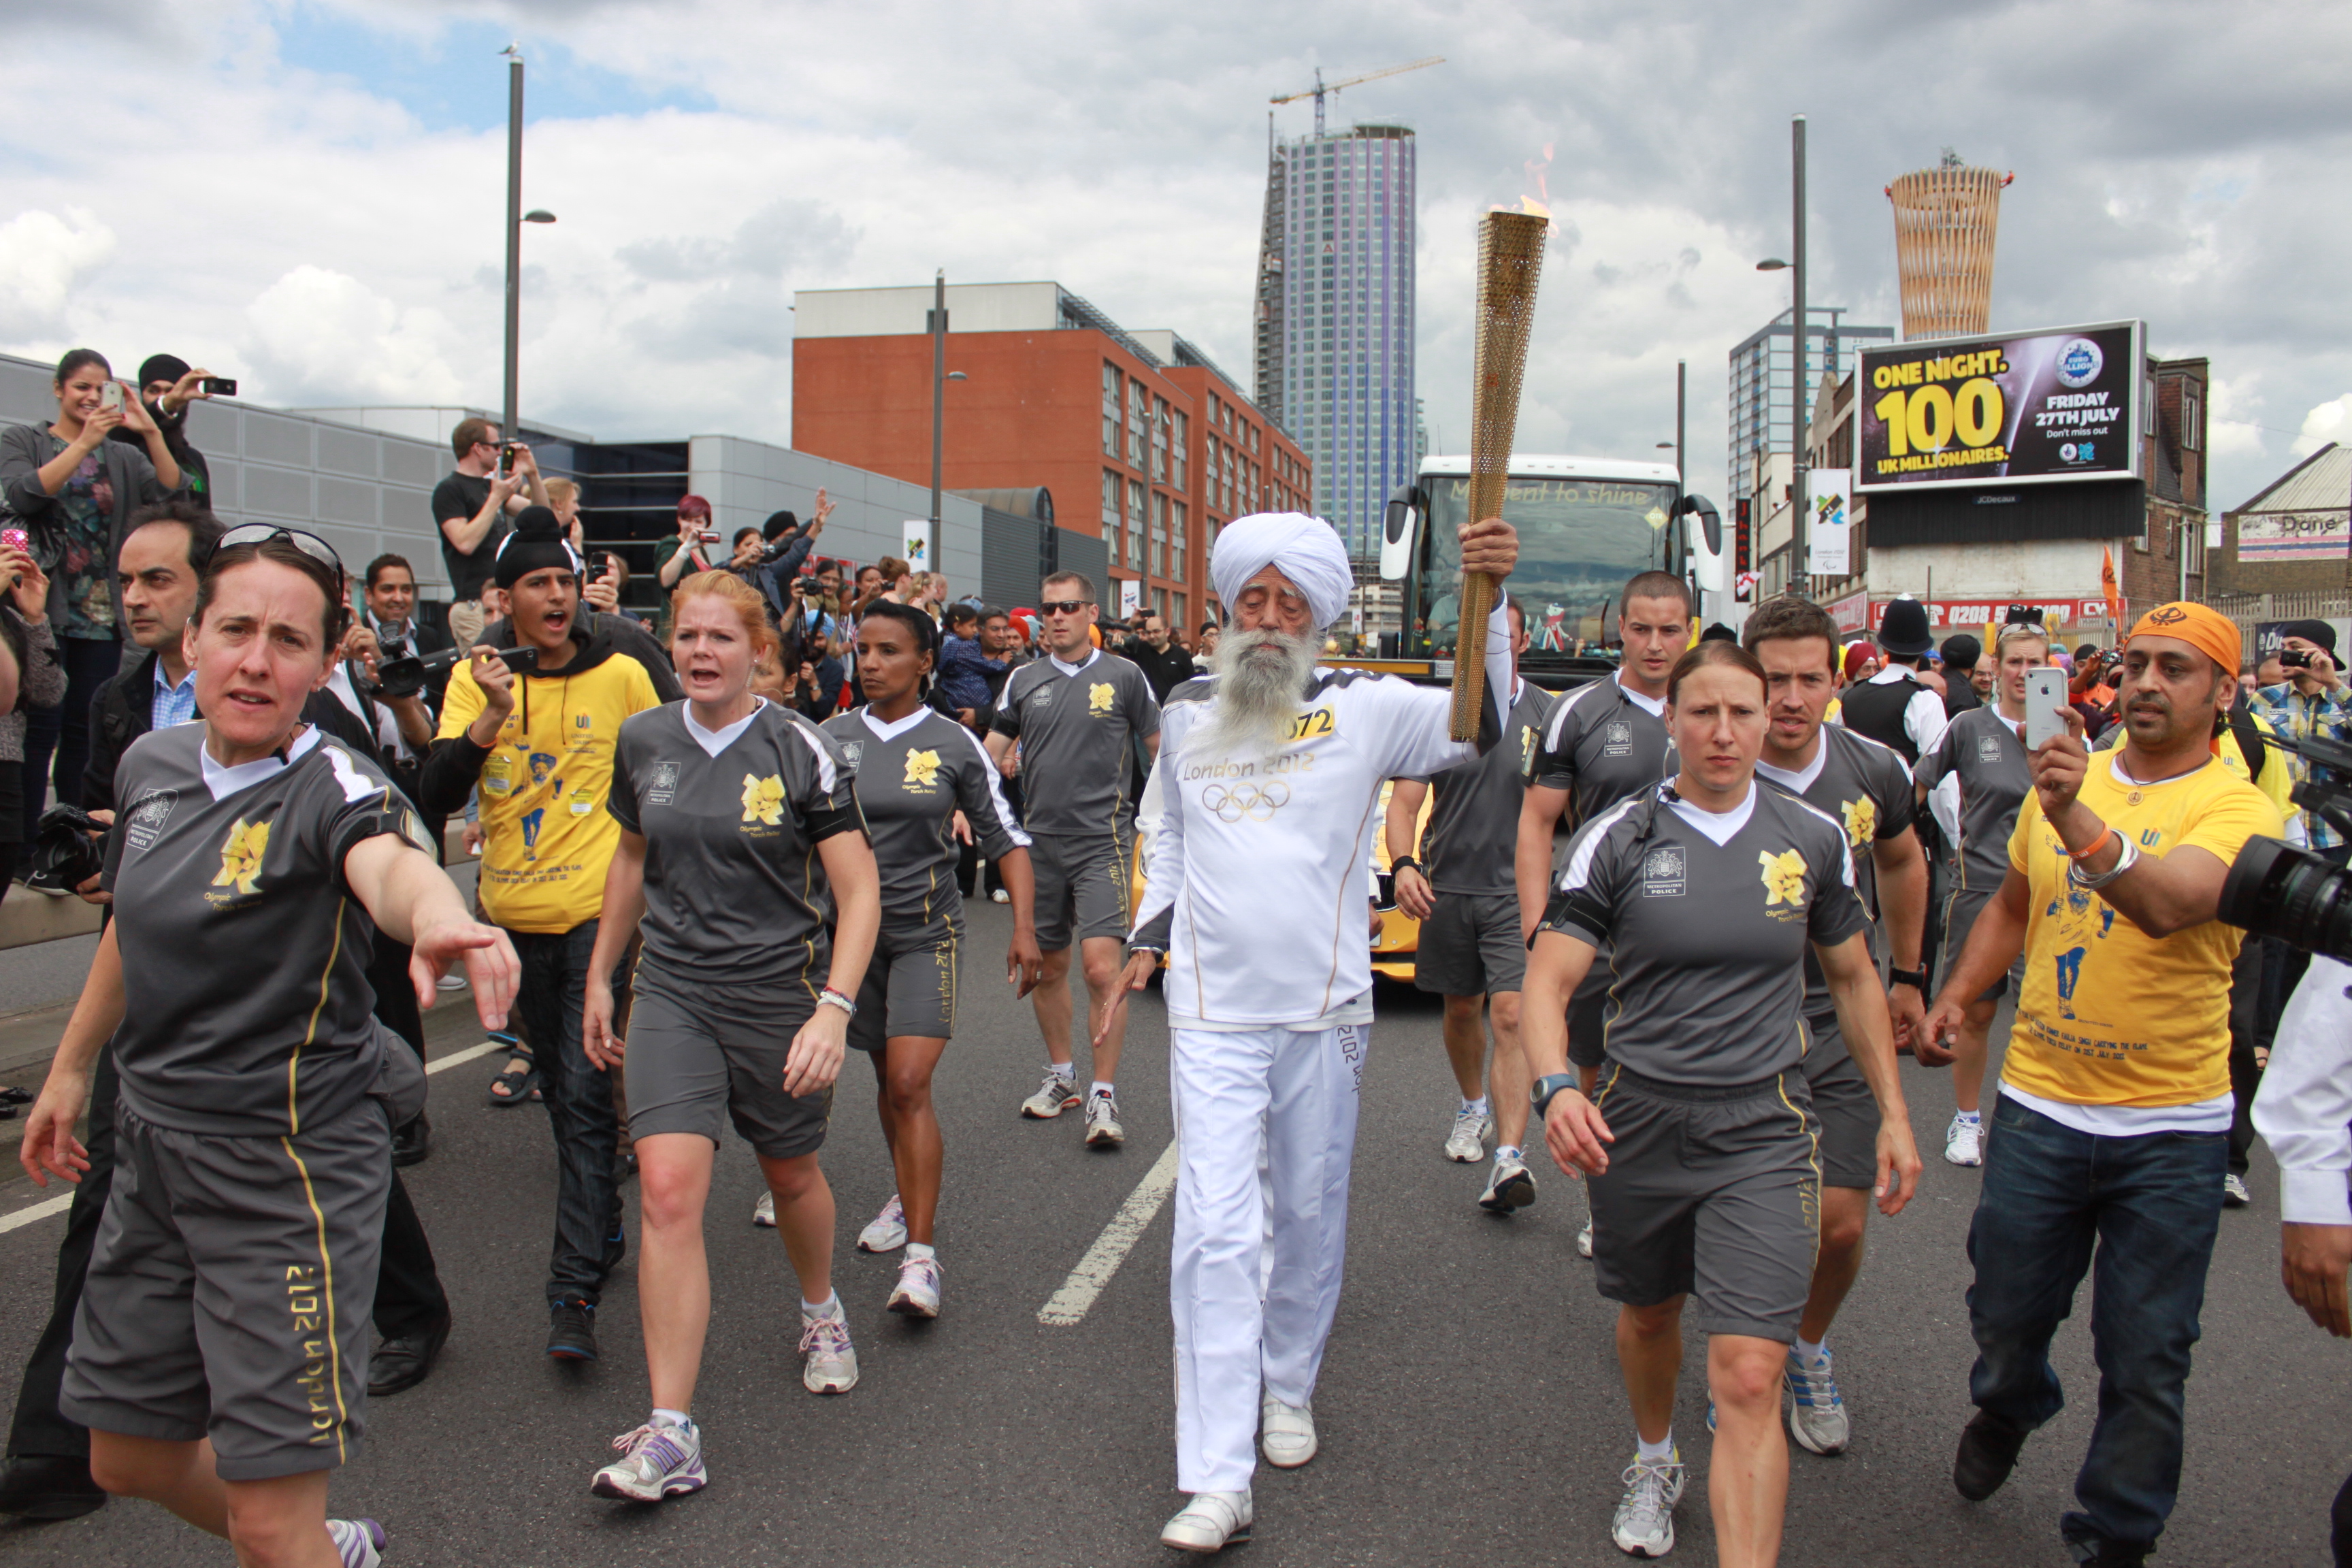 Fauja Singh running with the Olympic torch at the 2012 London Olympics